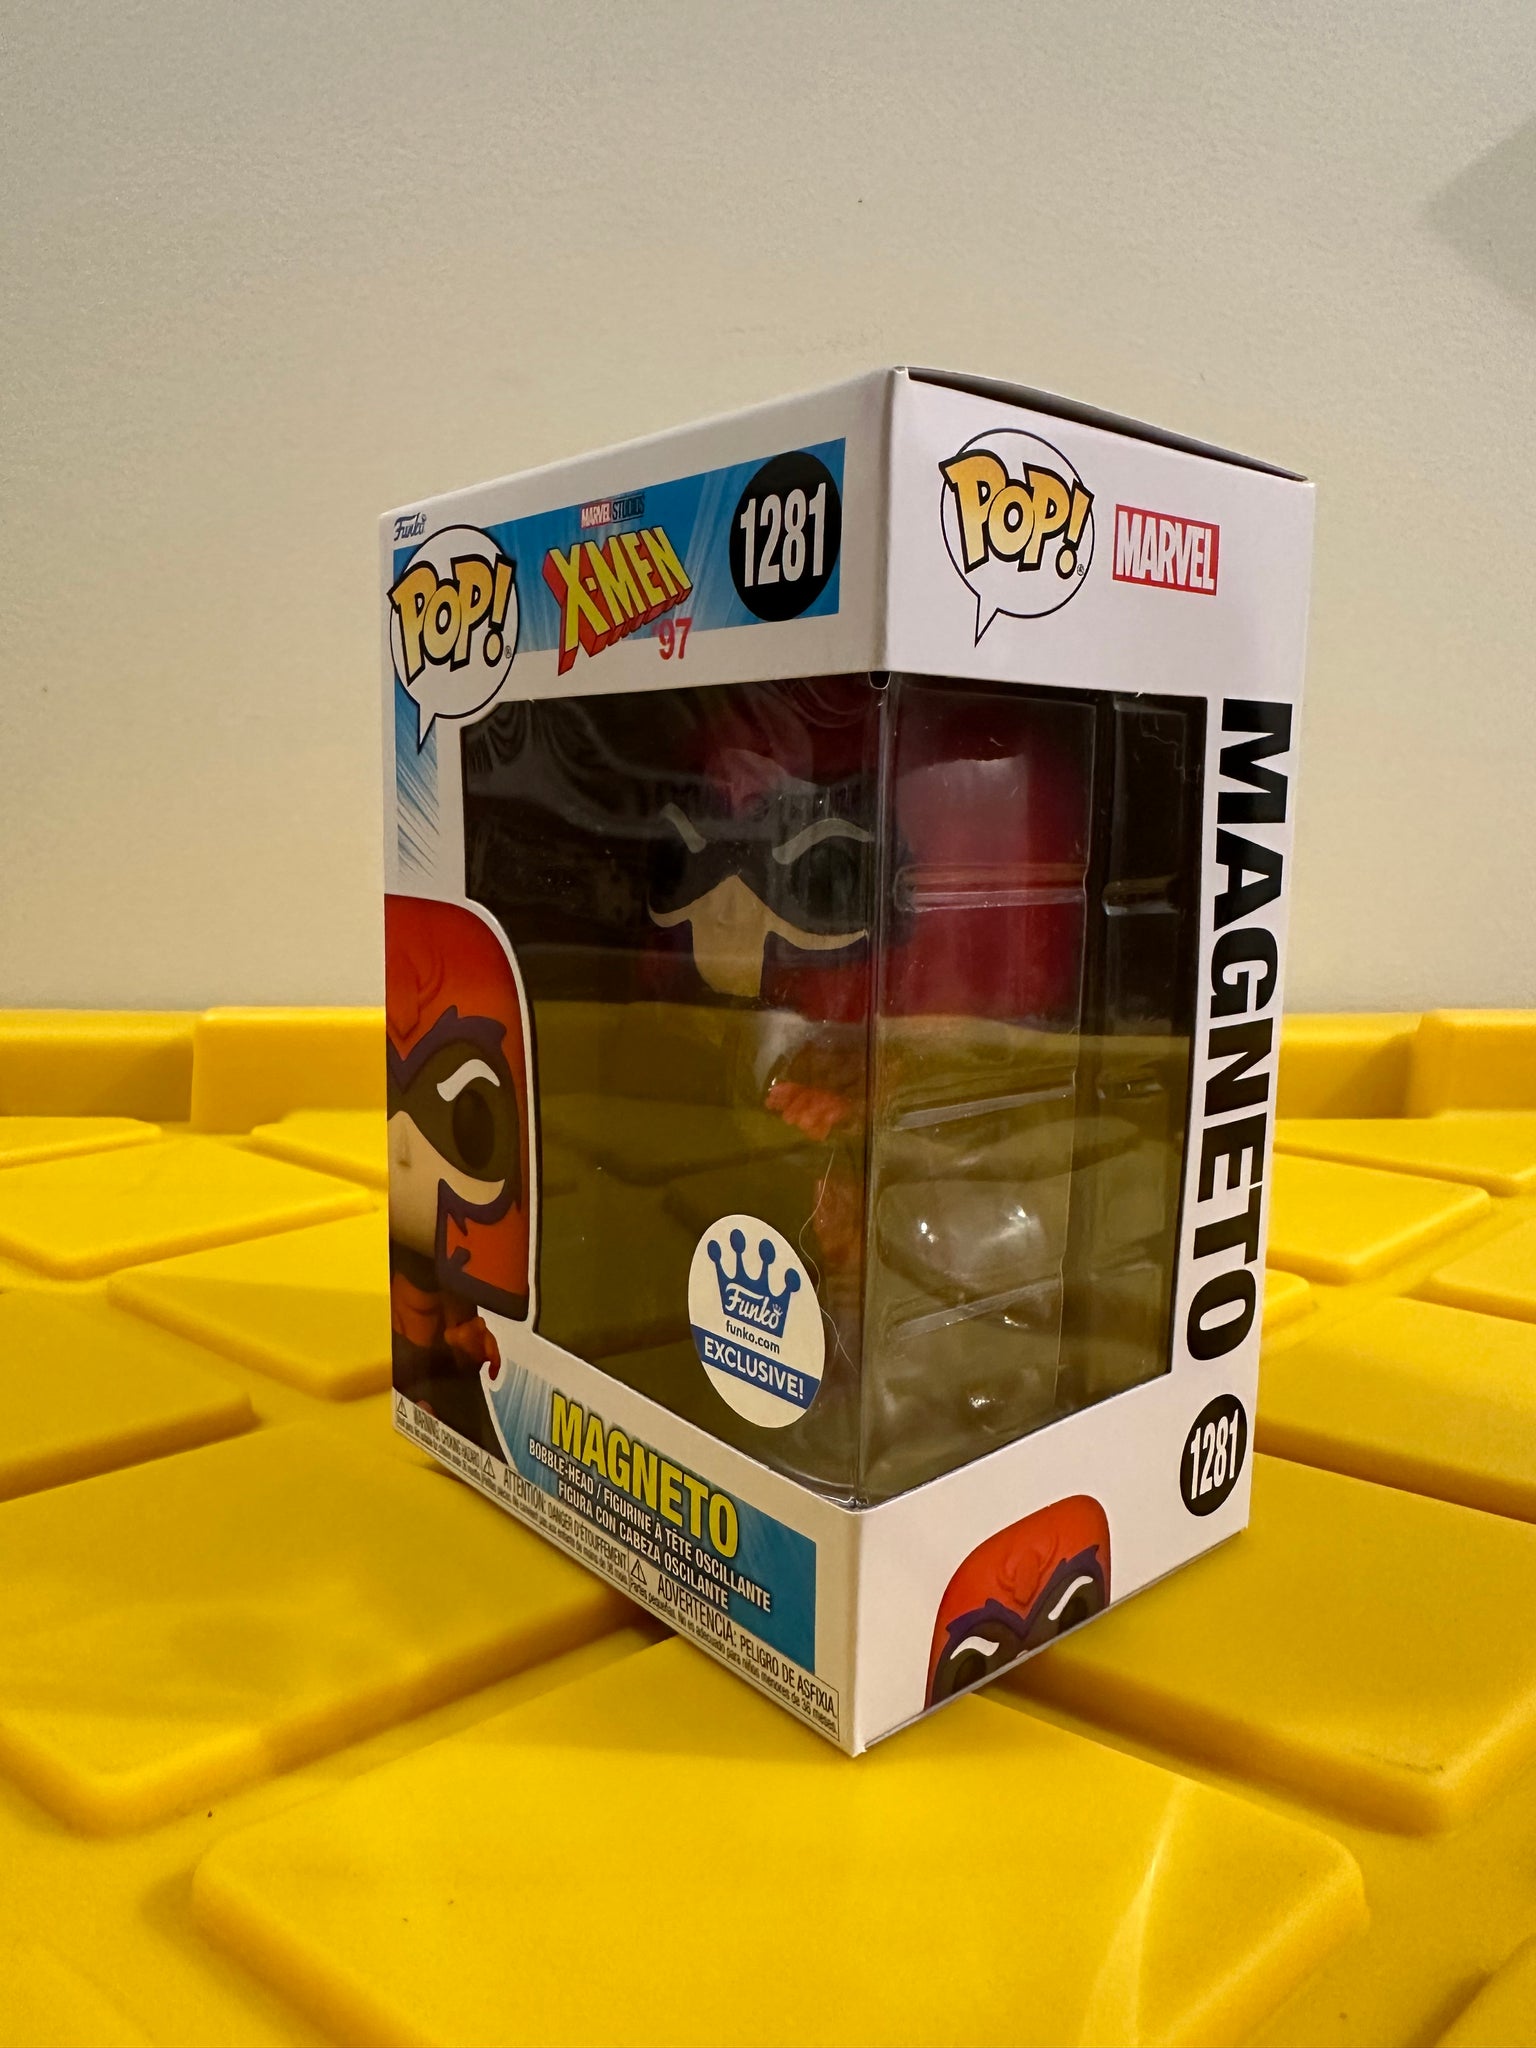 Magneto - Limited Edition Funko Shop Exclusive – Black Panther